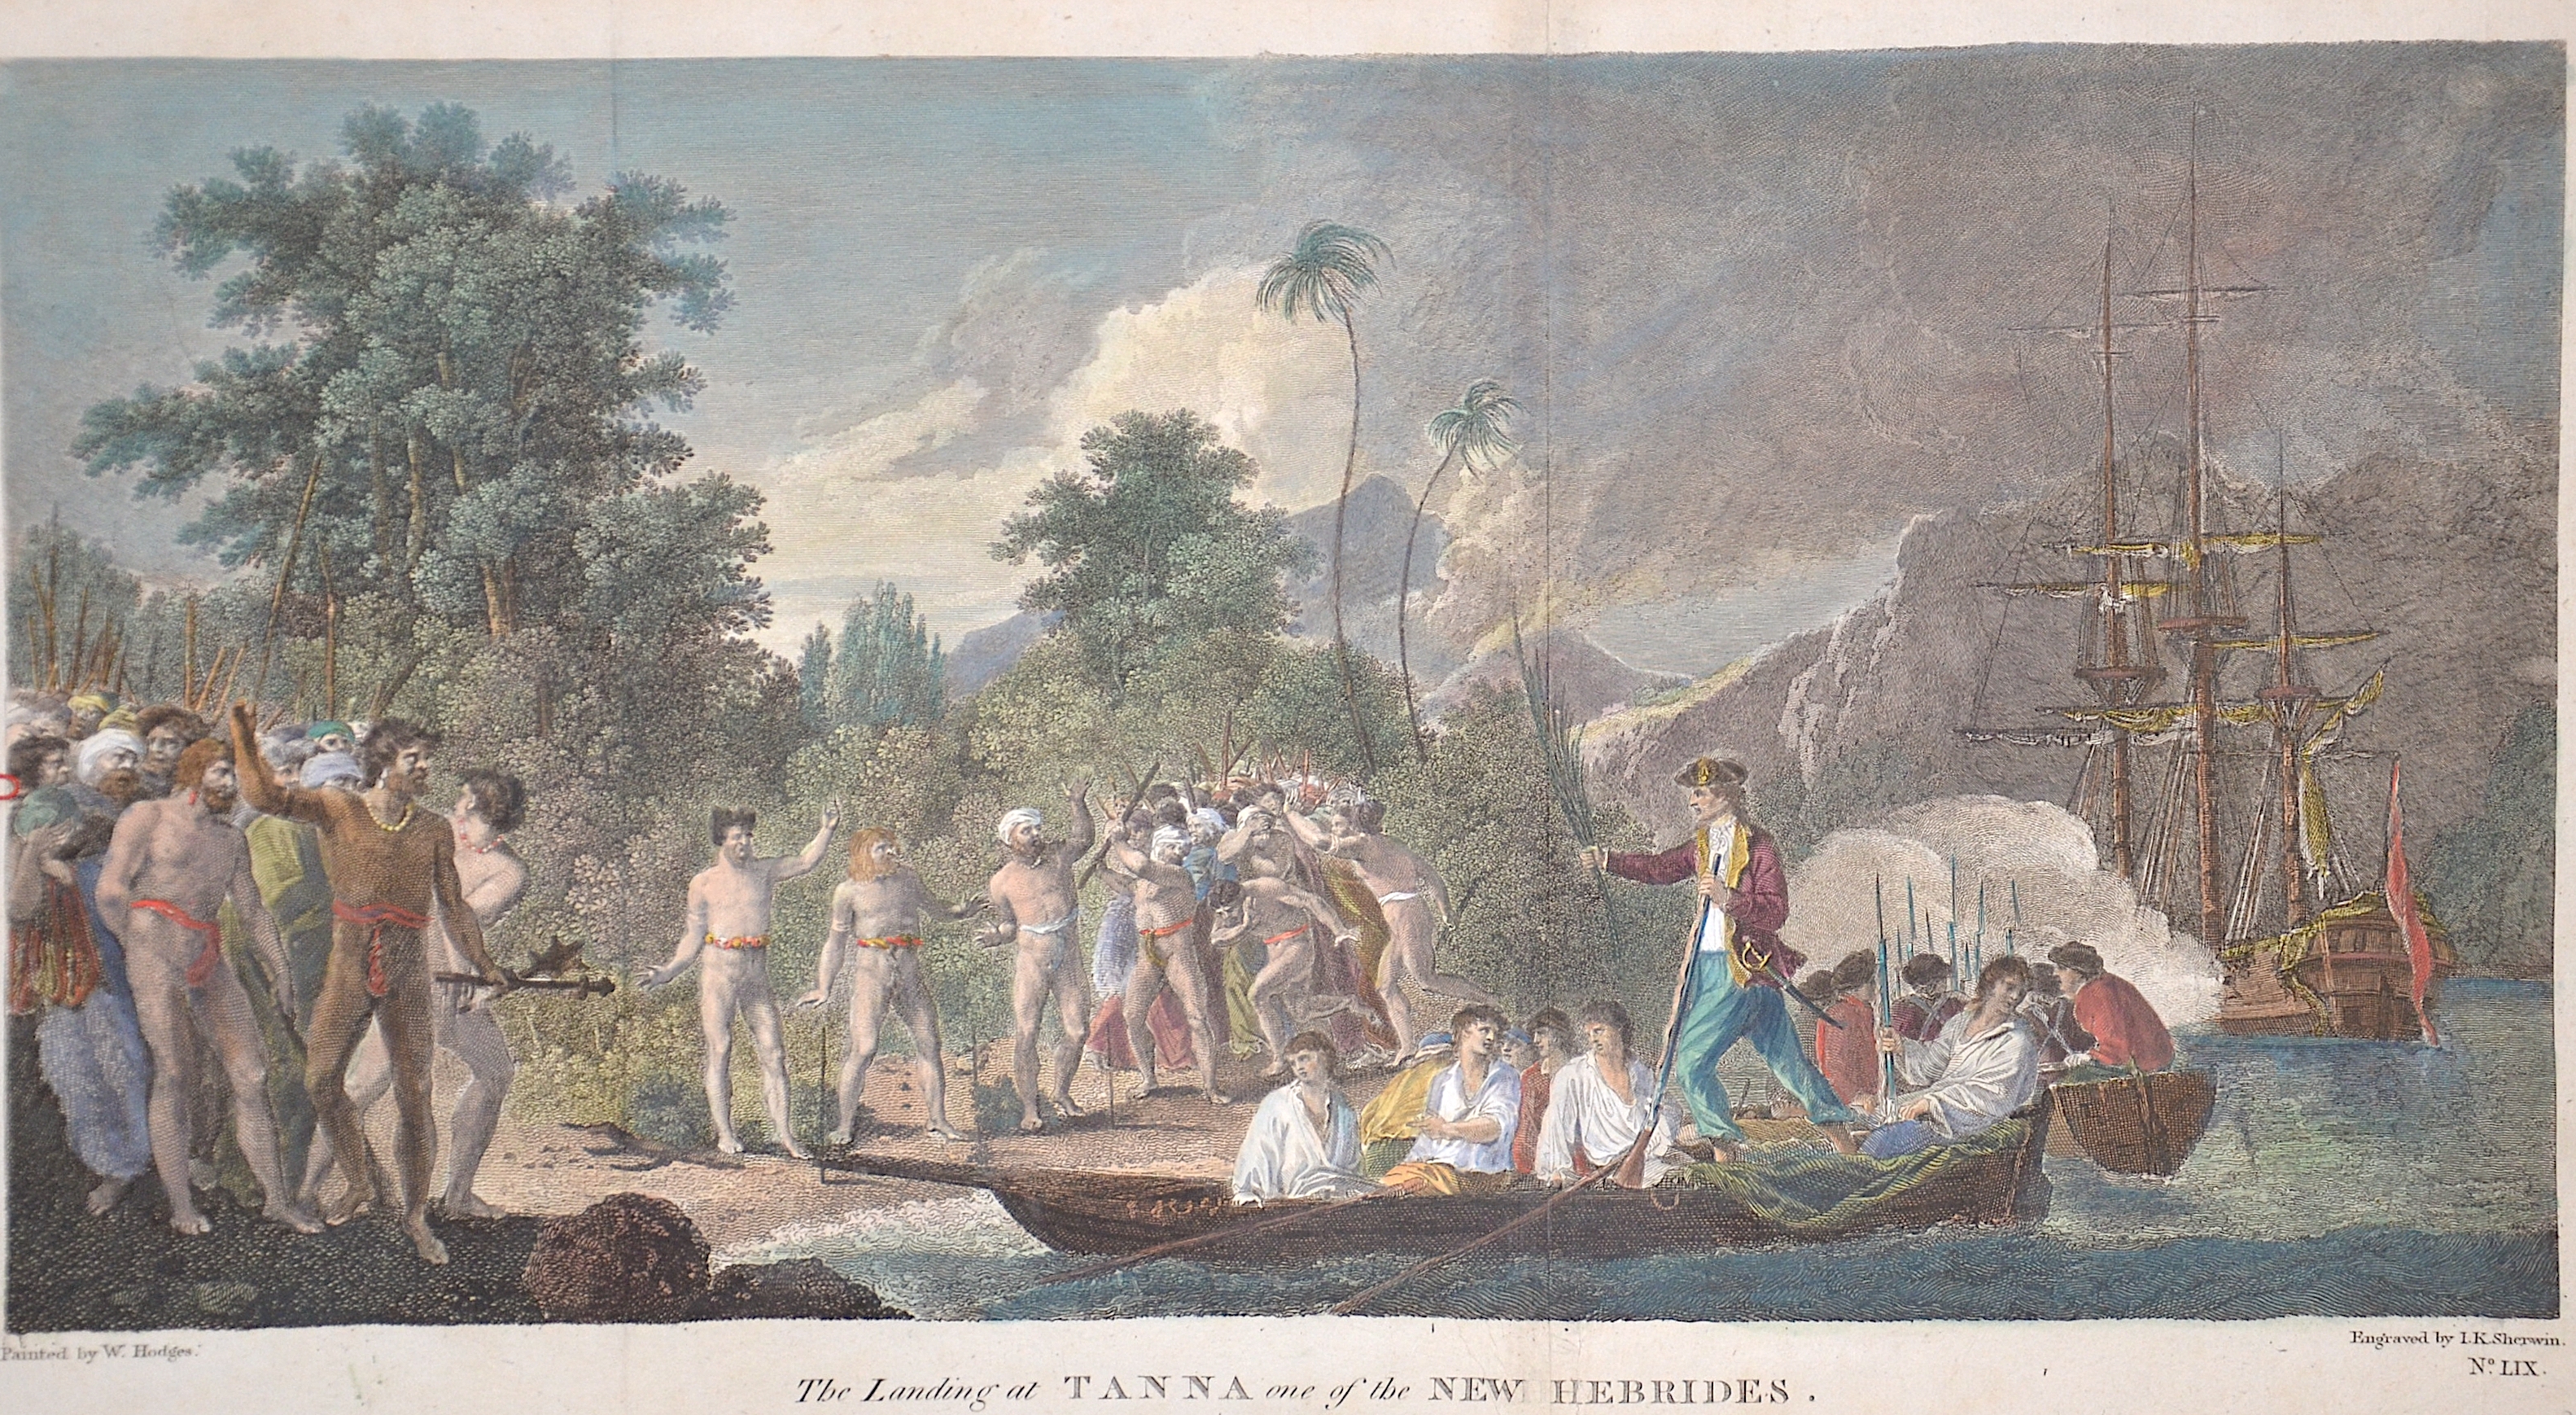 Sherwin J. K. The Landing at Tanna one of the New Hebrides.